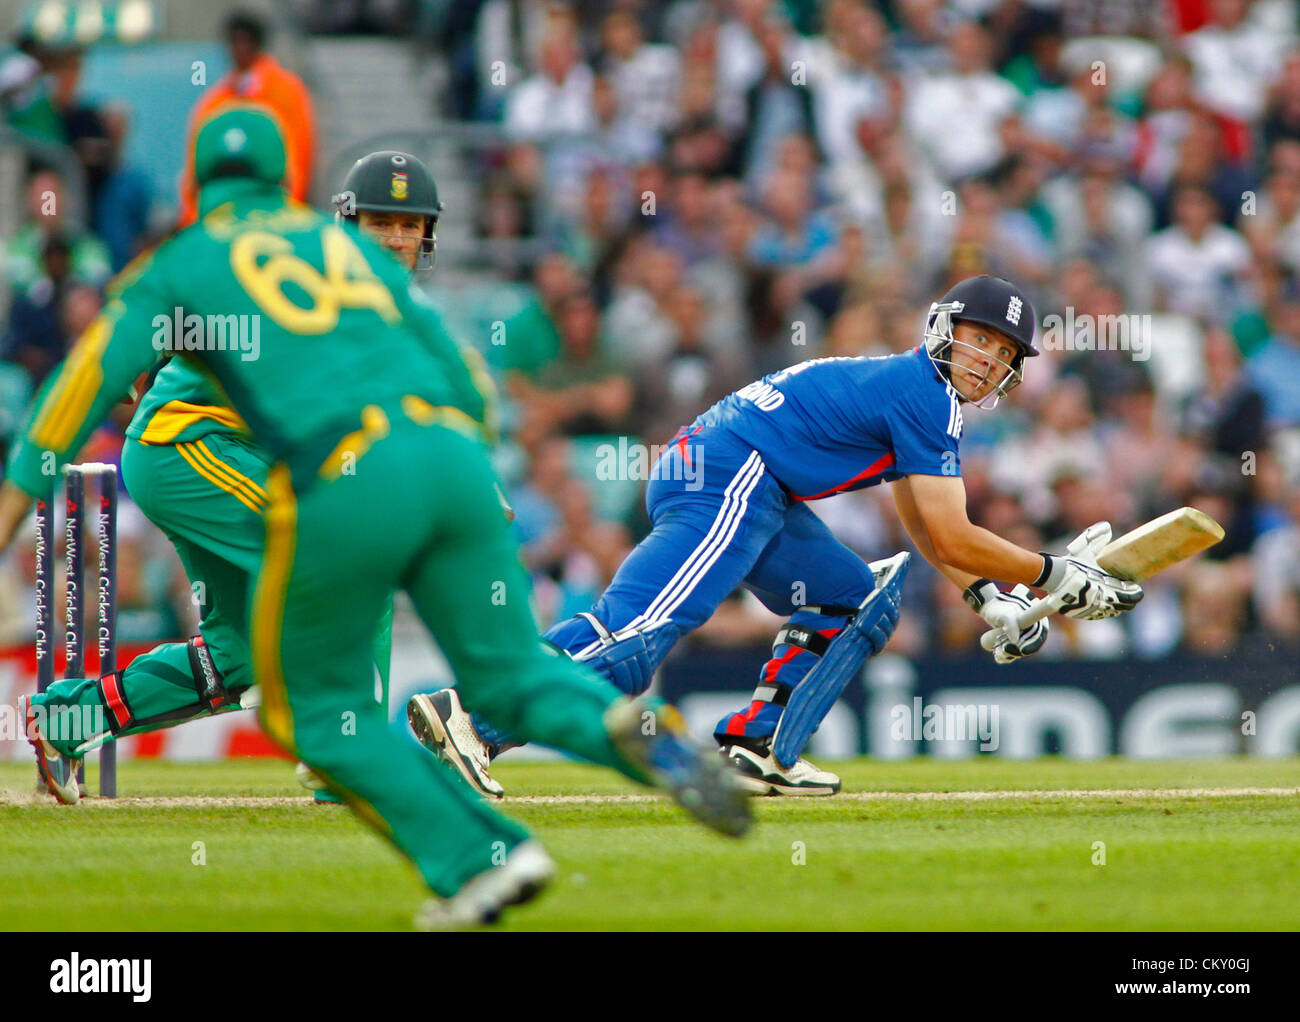 31/08/2012 London, England. England's Jonathan Trott during the 3rd Nat West one day international cricket match between  England and South Africa and played at The Kia Oval Cricket Ground: Mandatory credit: Mitchell Gunn Stock Photo